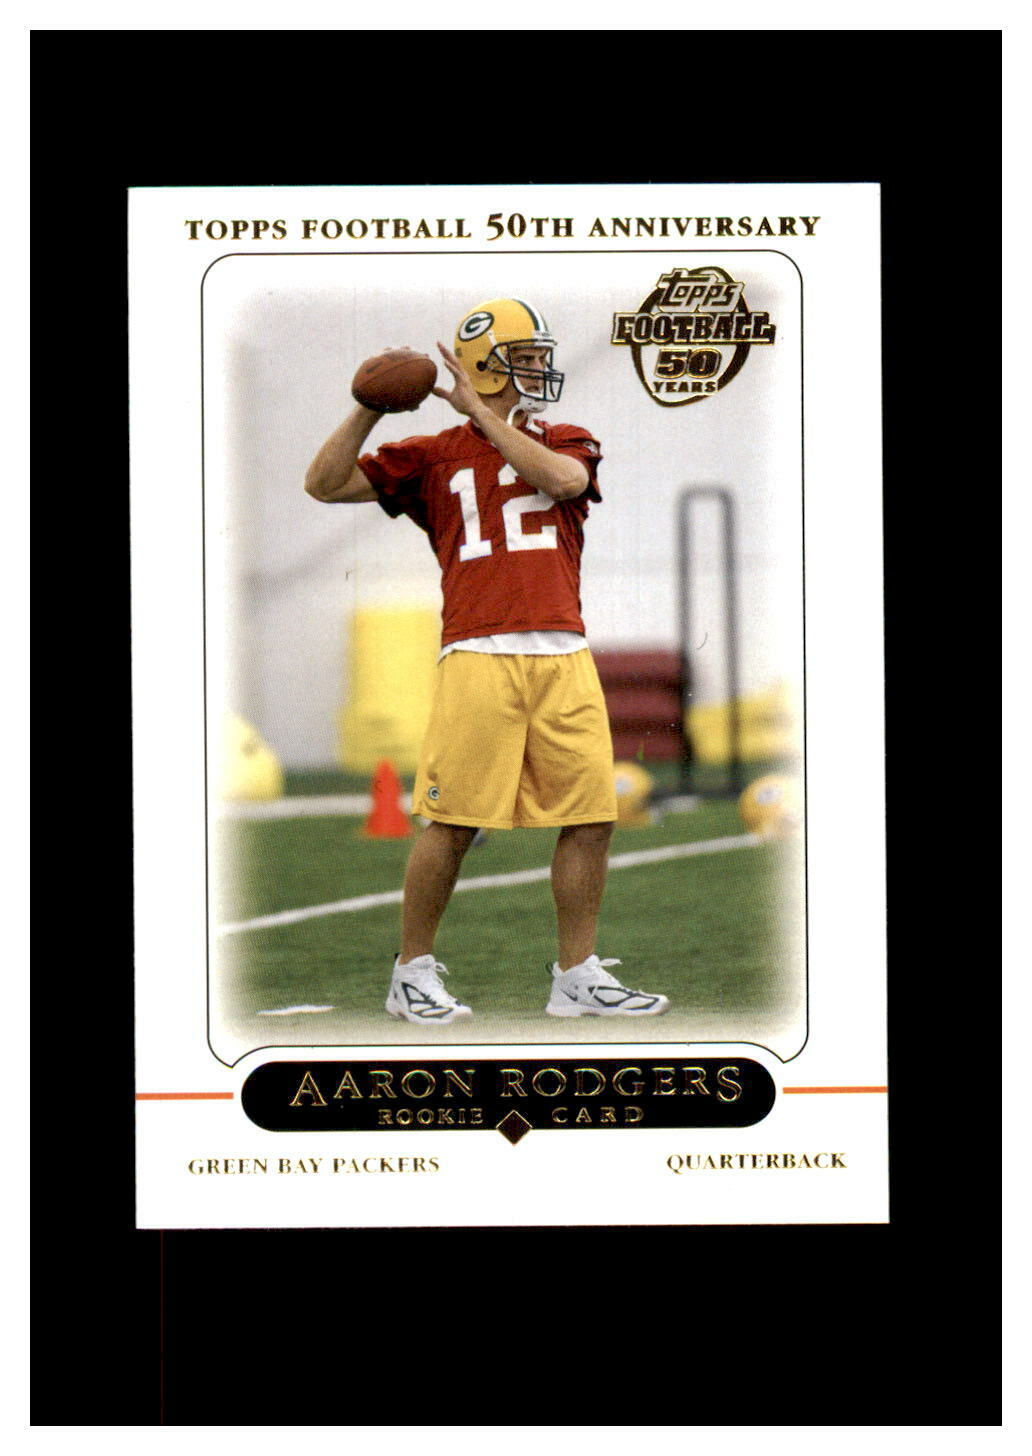 2005 Topps Set Break #431 Aaron Rodgers NM-MT OR BETTER *GMCARDS*